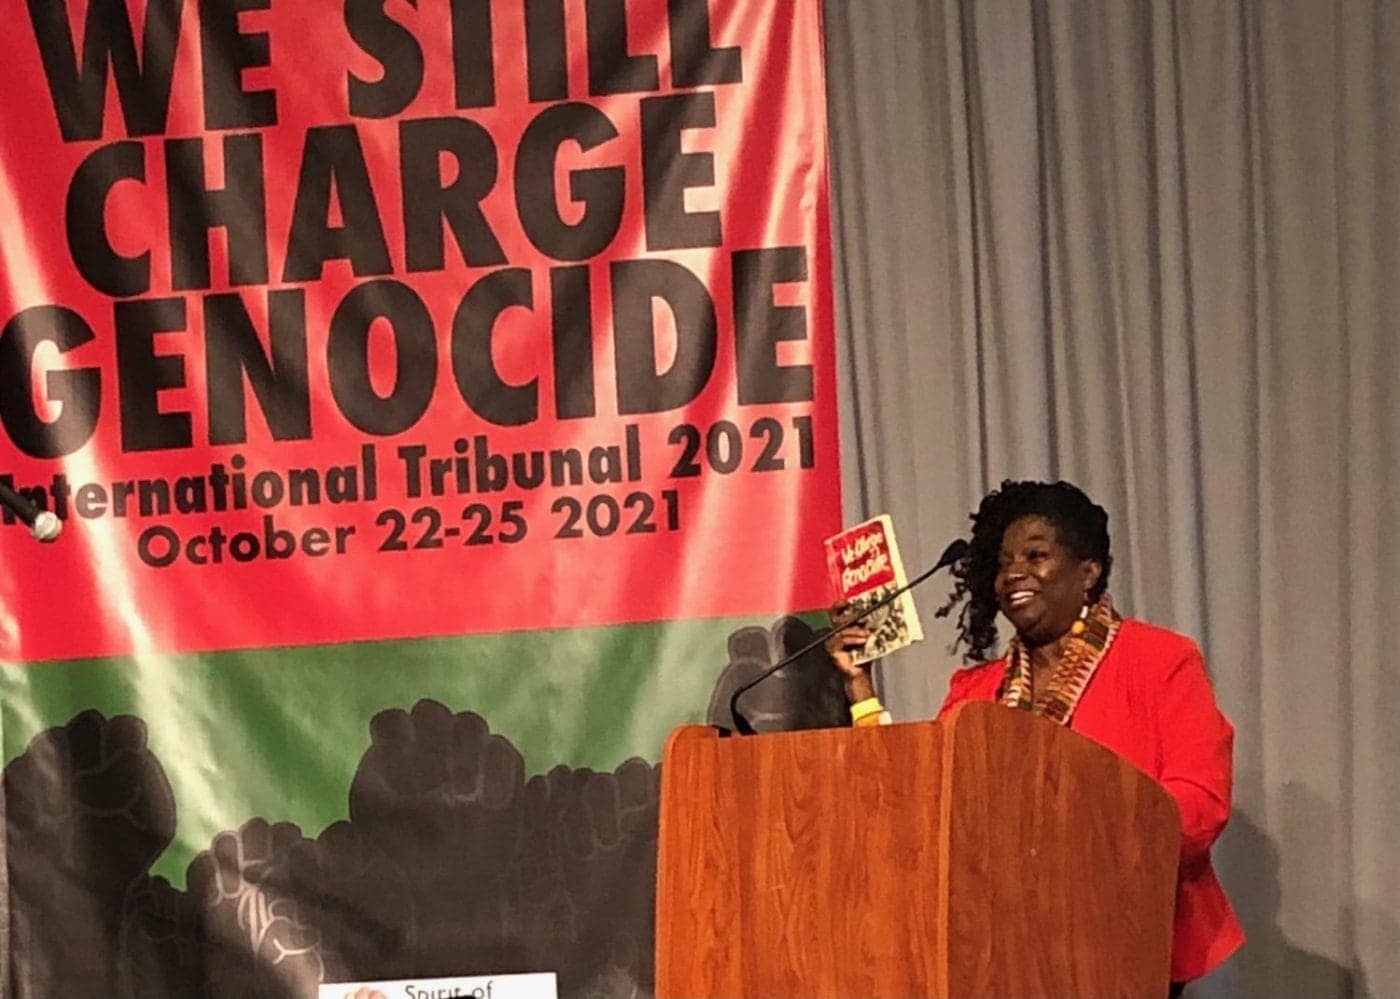 Nkechi-Taifa-chief-peoples-attorney-International-Panel-of-Jurists-Tribunal-Charging-Genocide-by-Karpani-1021-1400x999, Guilty on all counts!, News & Views 